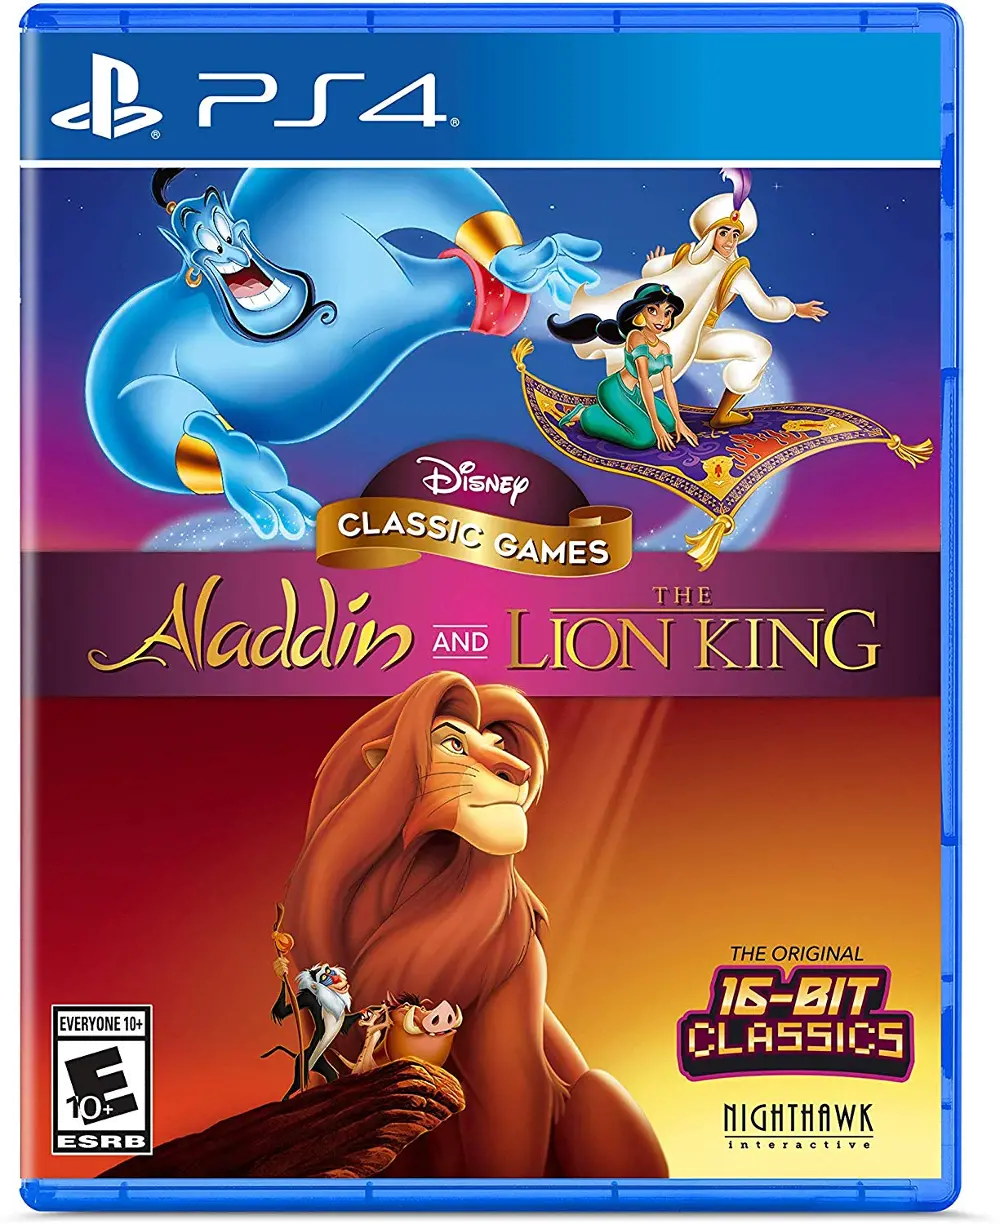 PS4/ALADDIN_LIONKING Disney Classic Games: Aladdin and Lion King - PS4-1